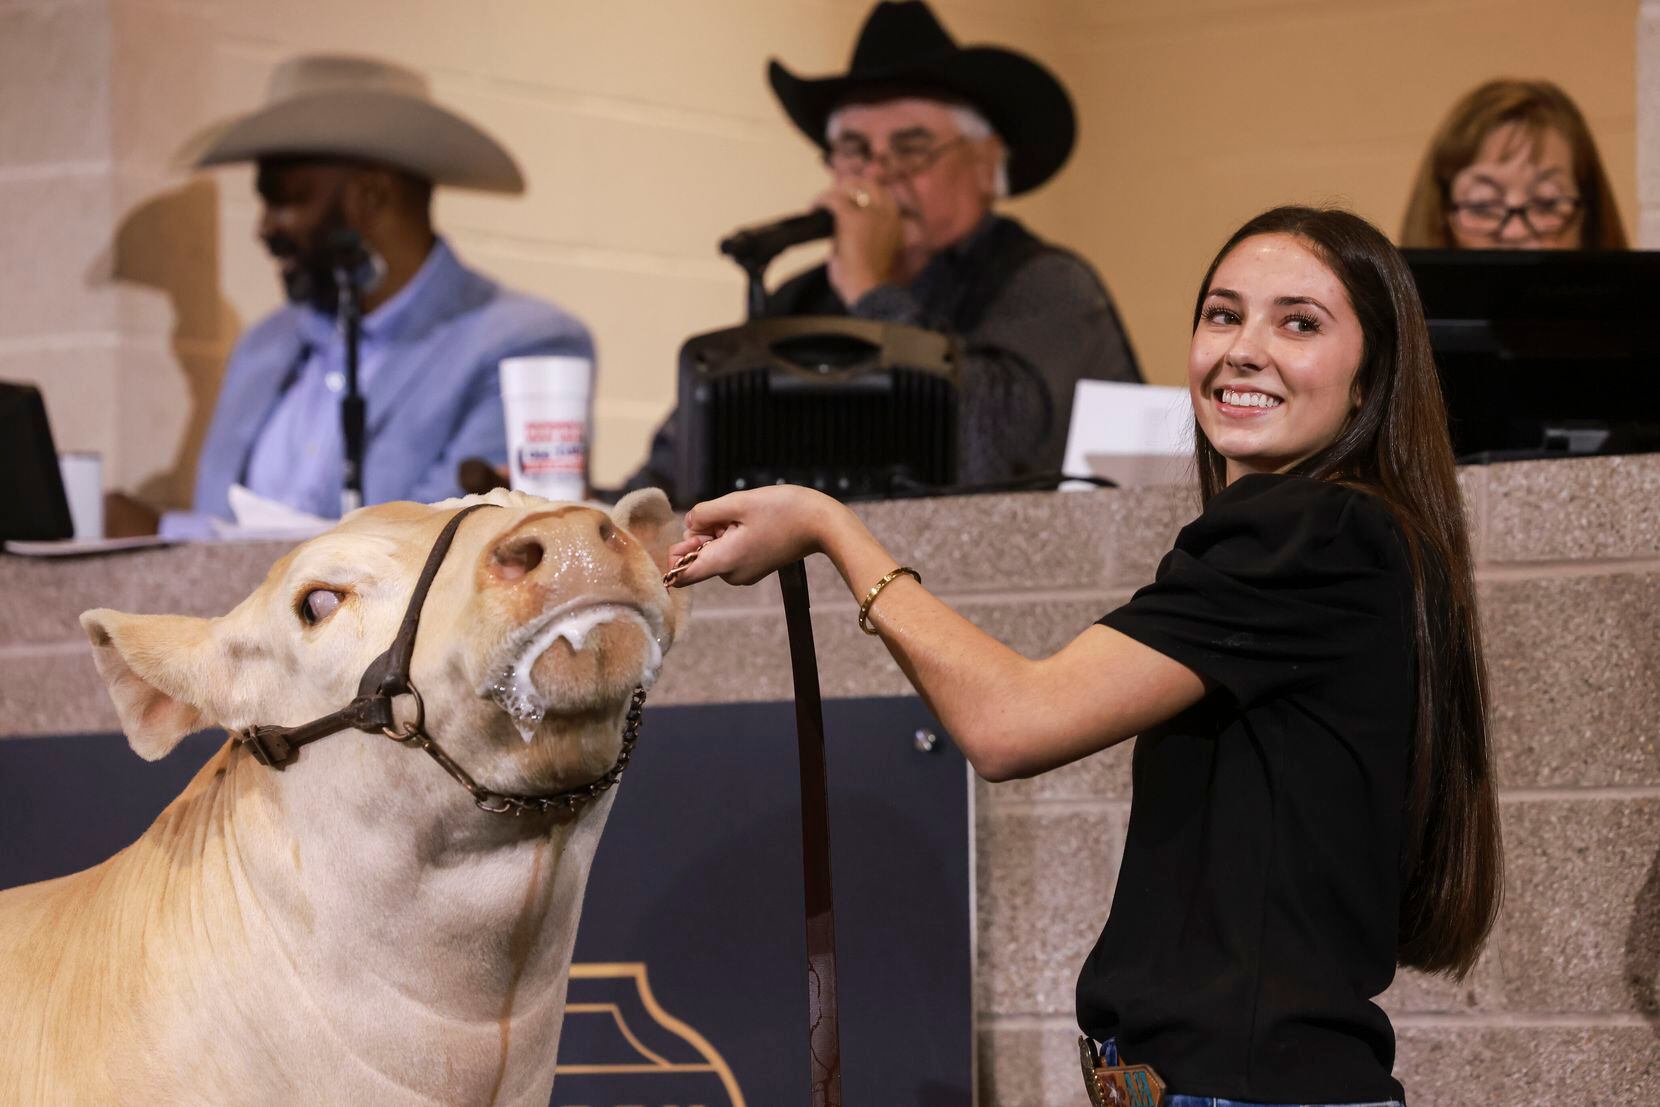 Aven Horn, 17, holds her steer, Blondie, during the Big Tex Youth Livestock Auction.